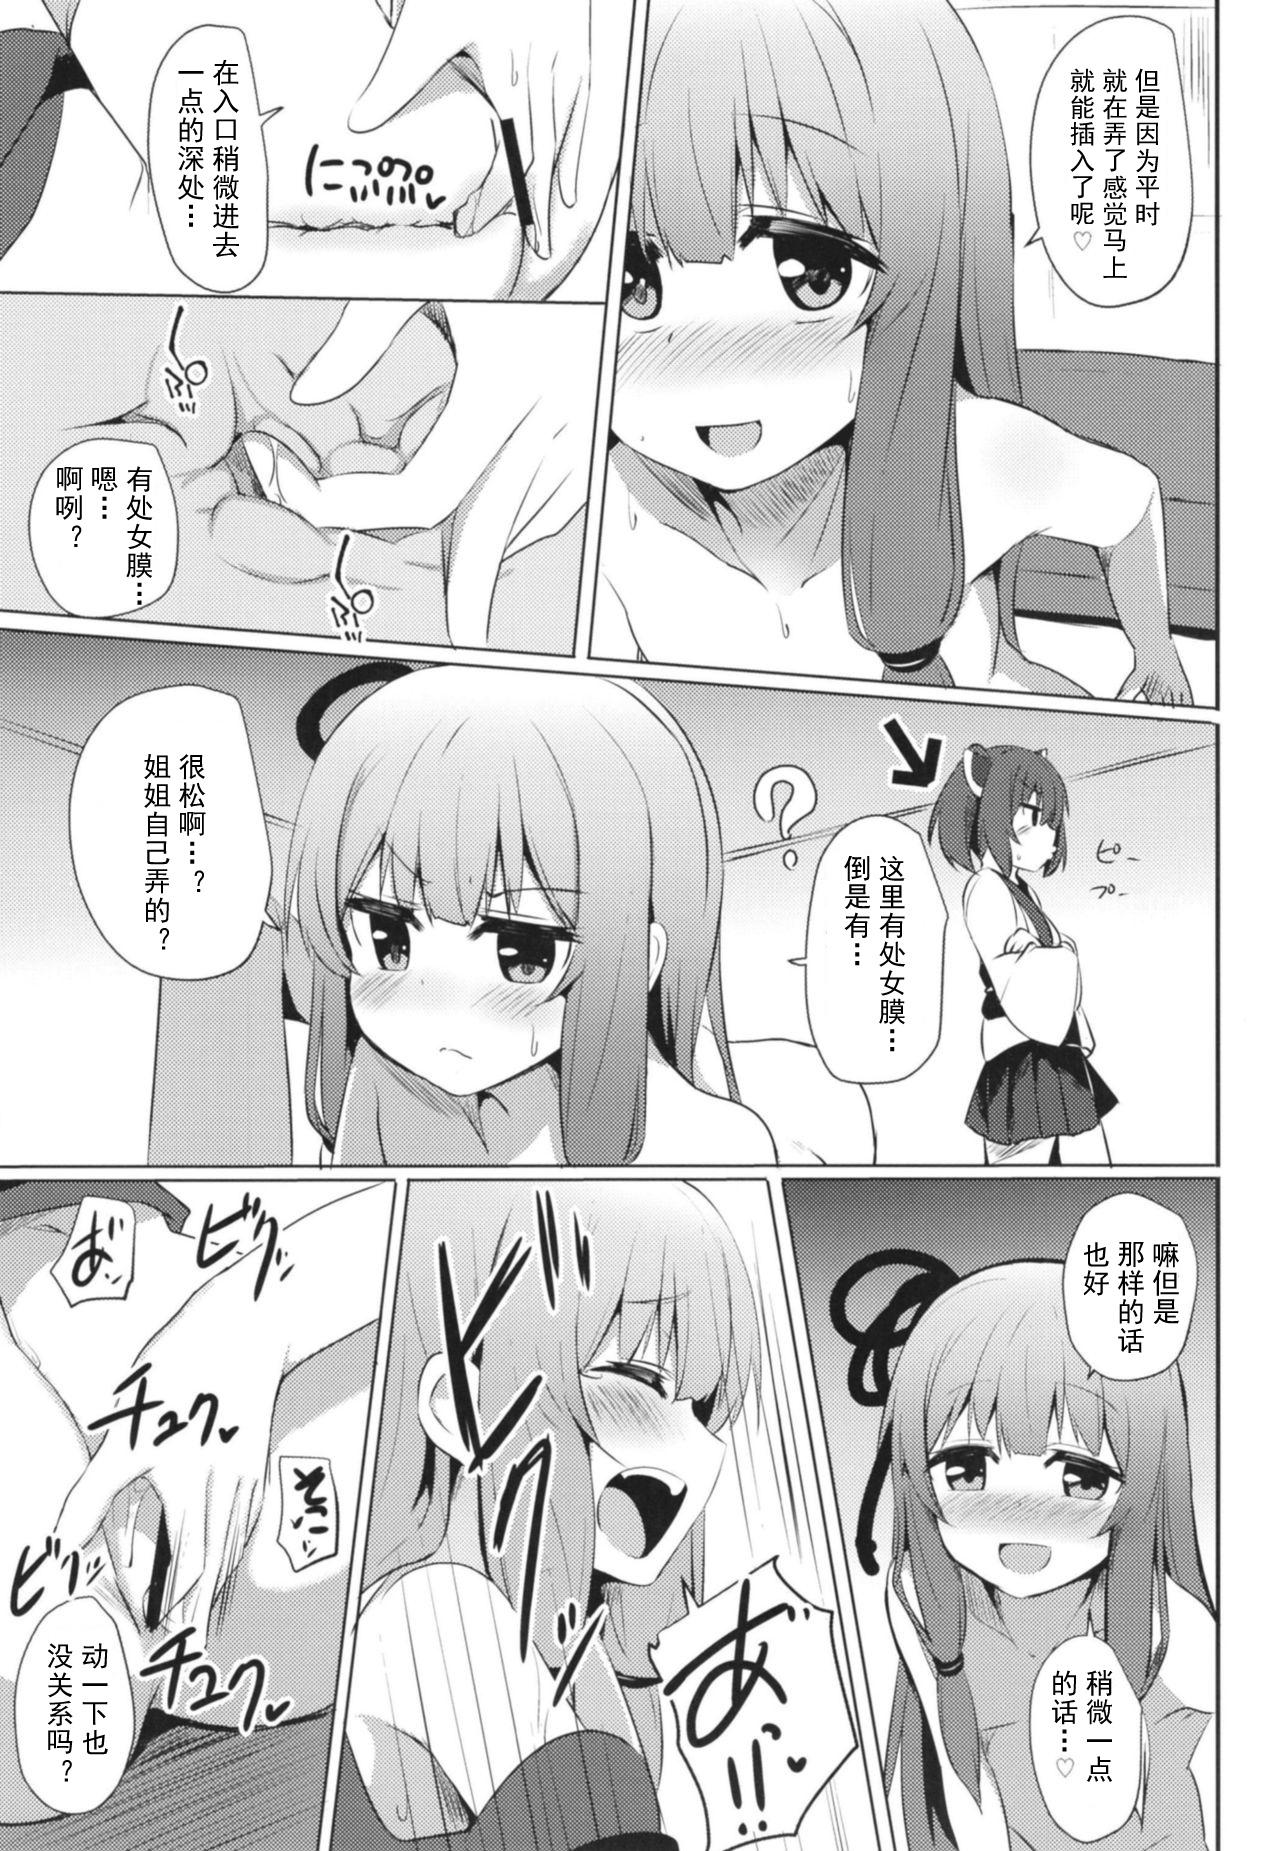 Daring [Milk Pudding (Jamcy)] Akane-chan Challenge! 4-kaime (VOICEROID) [Chinese] [古早个人汉化] [Digital] - Voiceroid Caiu Na Net - Page 7